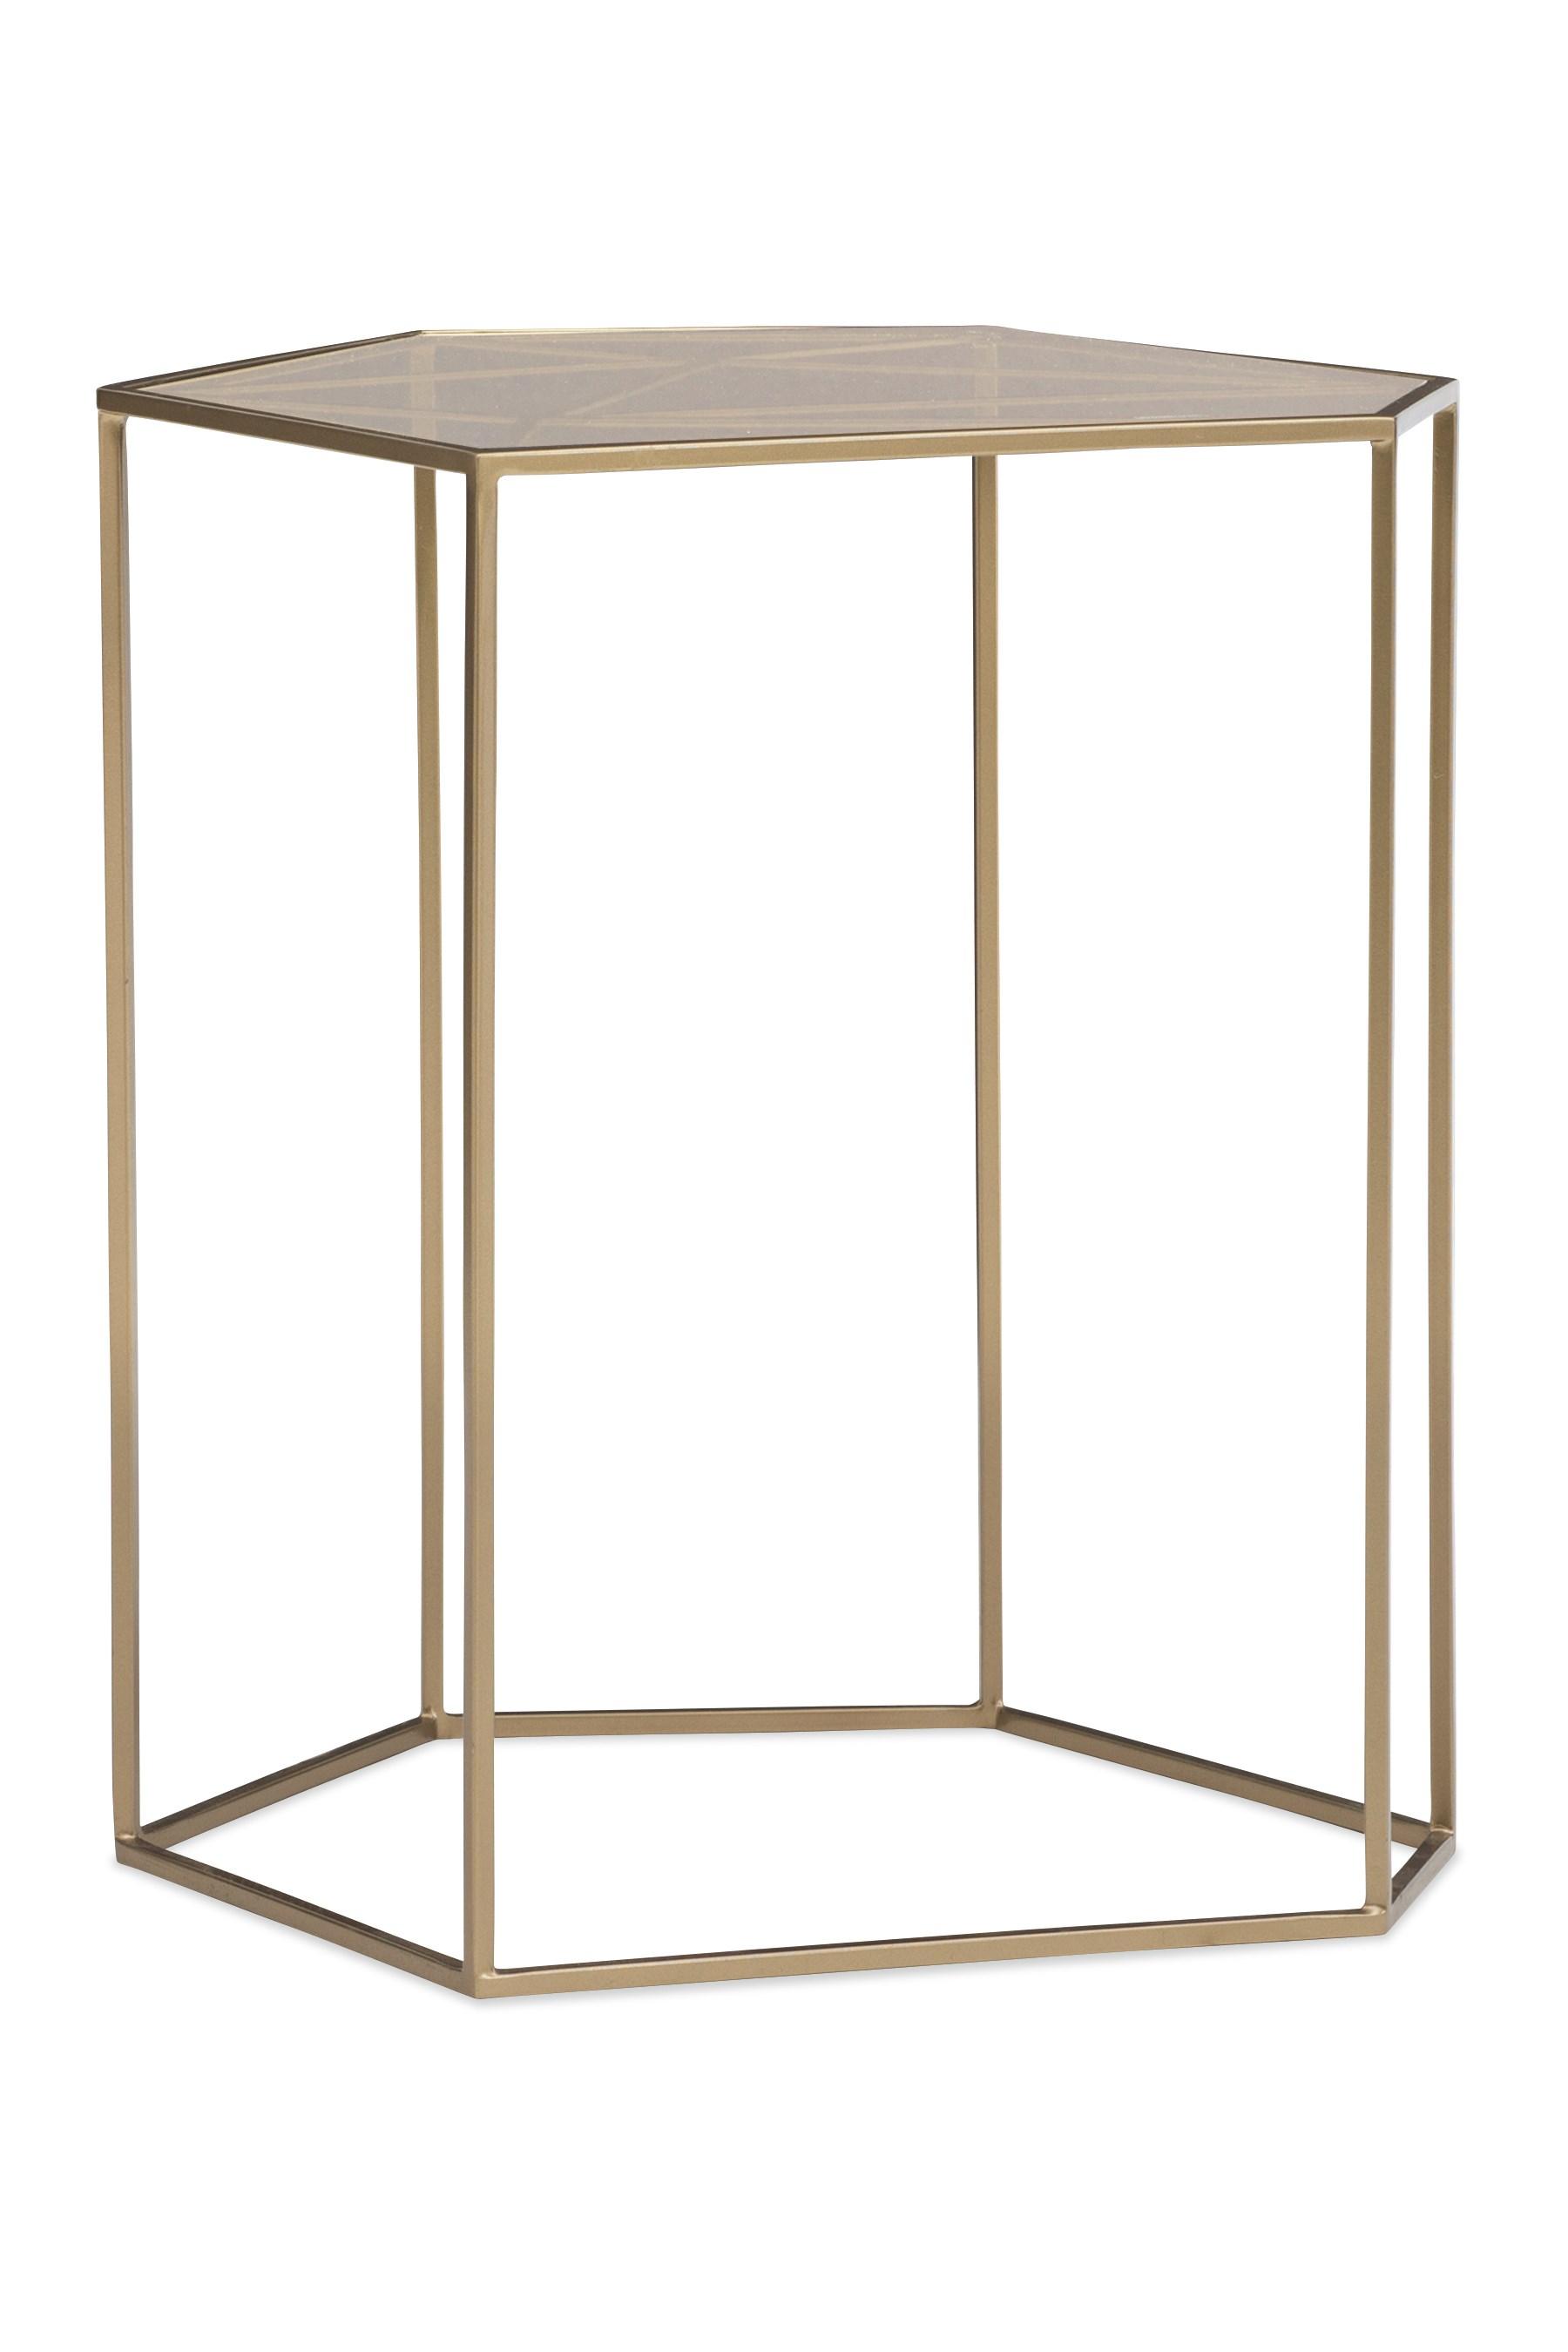 Contemporary End Table VECTOR ACCENT TABLE M101-419-421 in Gold 